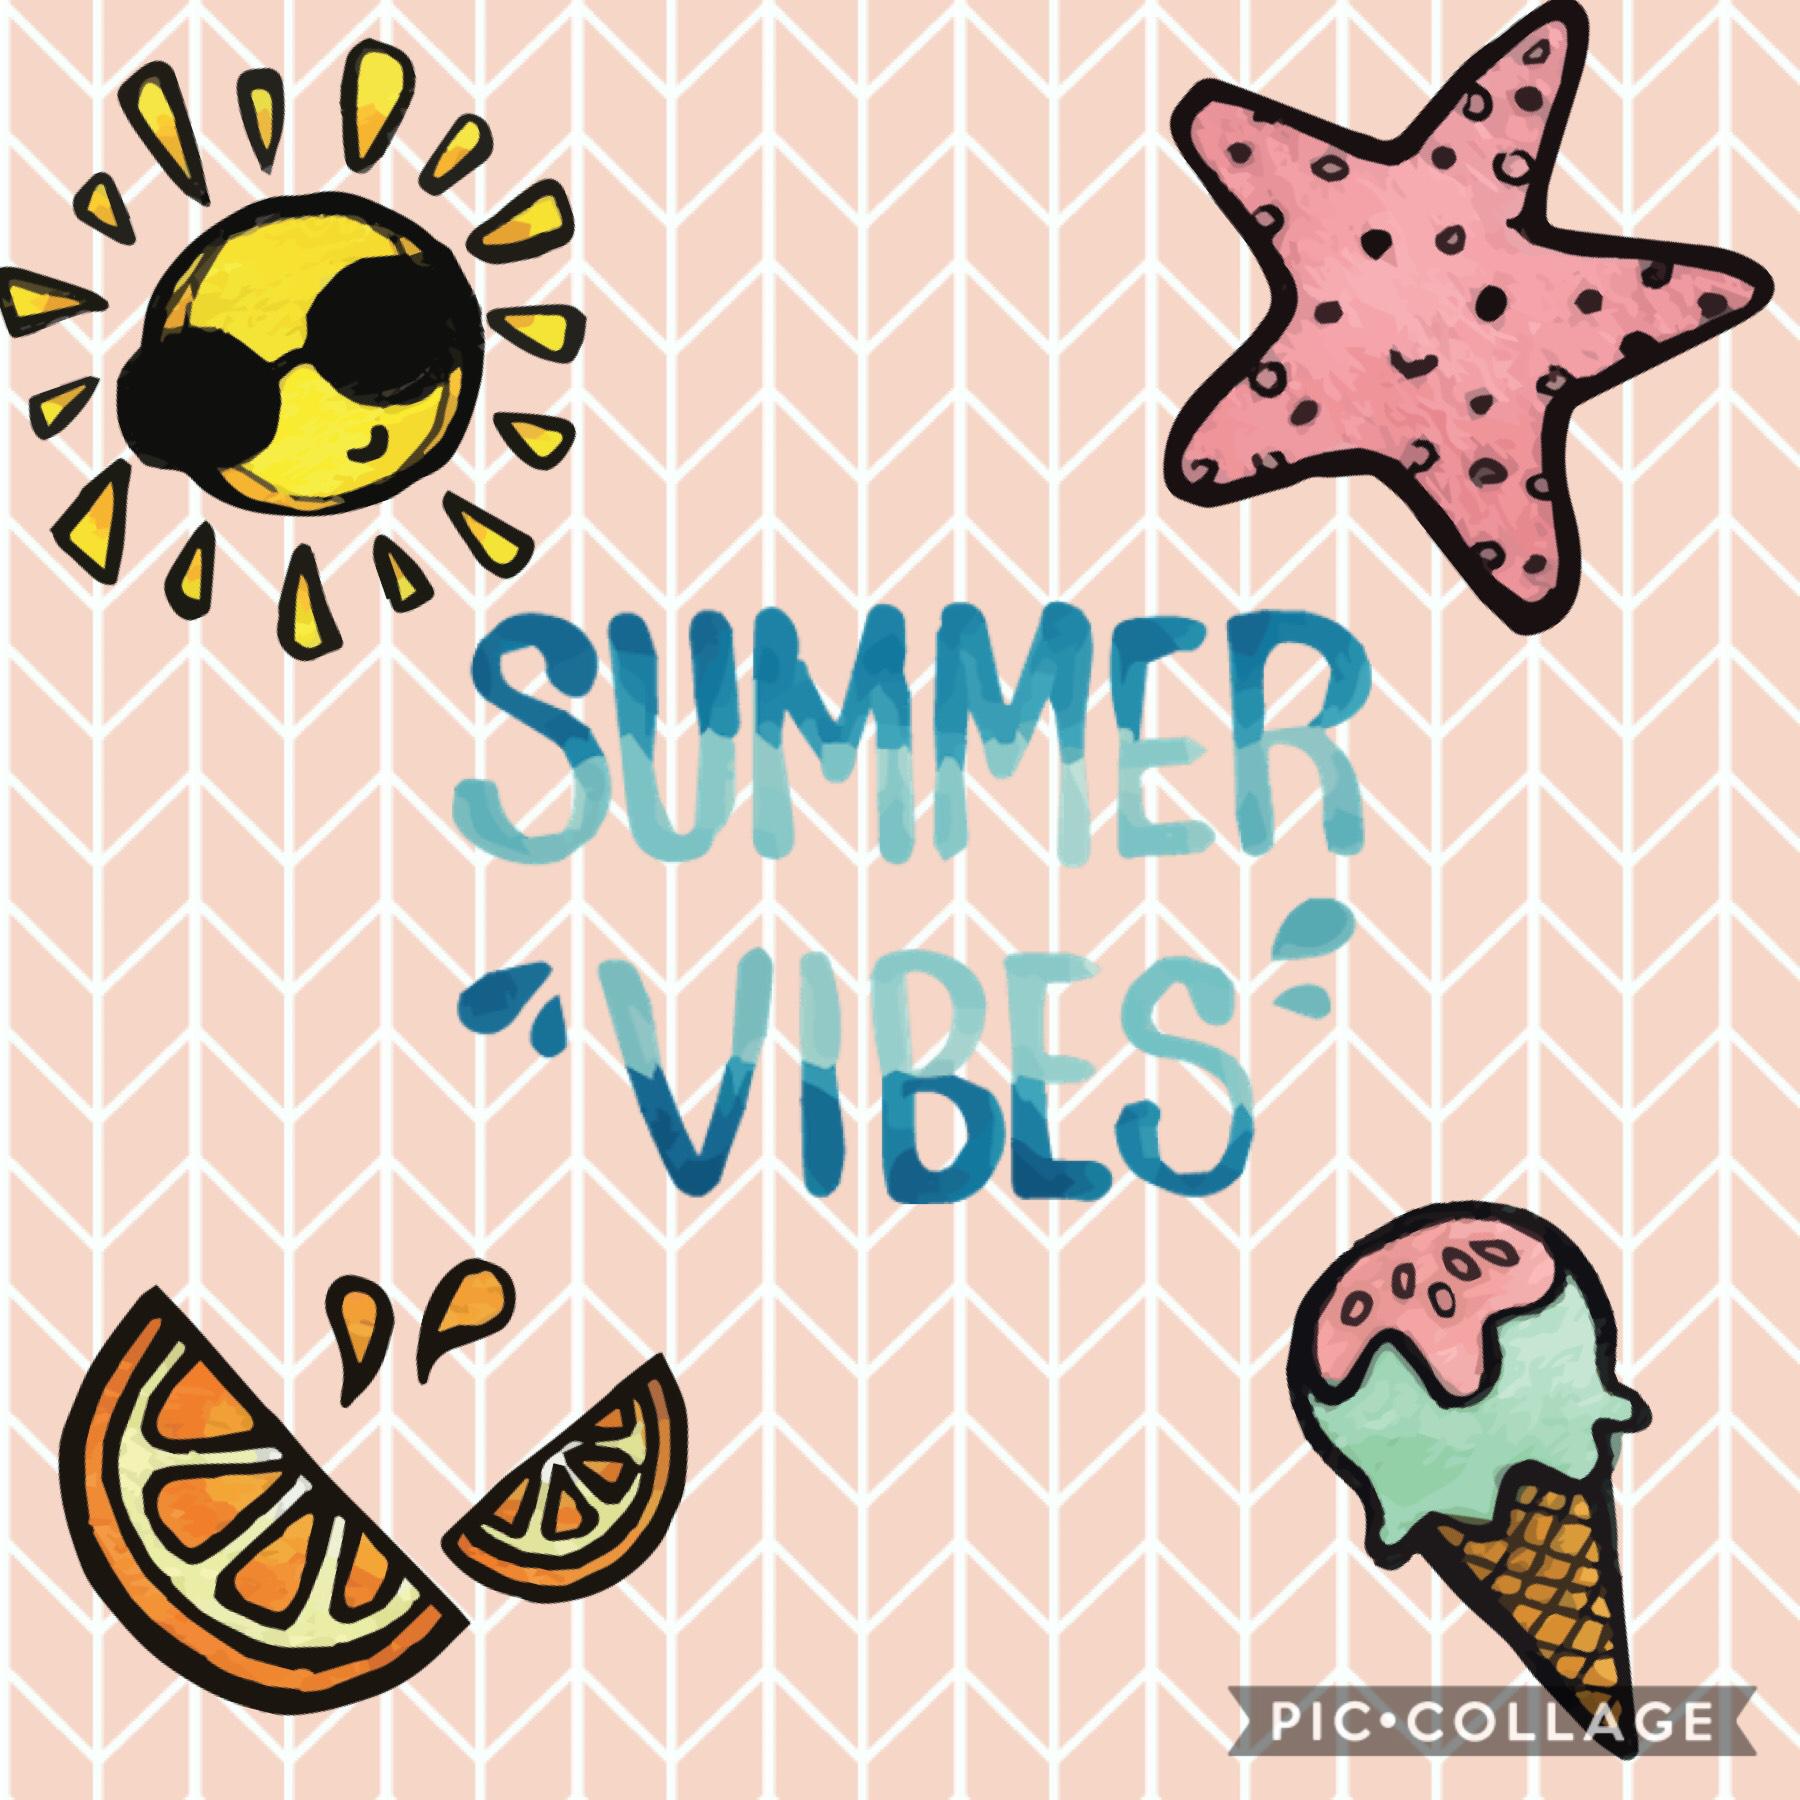 Everyone have summer vibes 

I never want the summer to end 